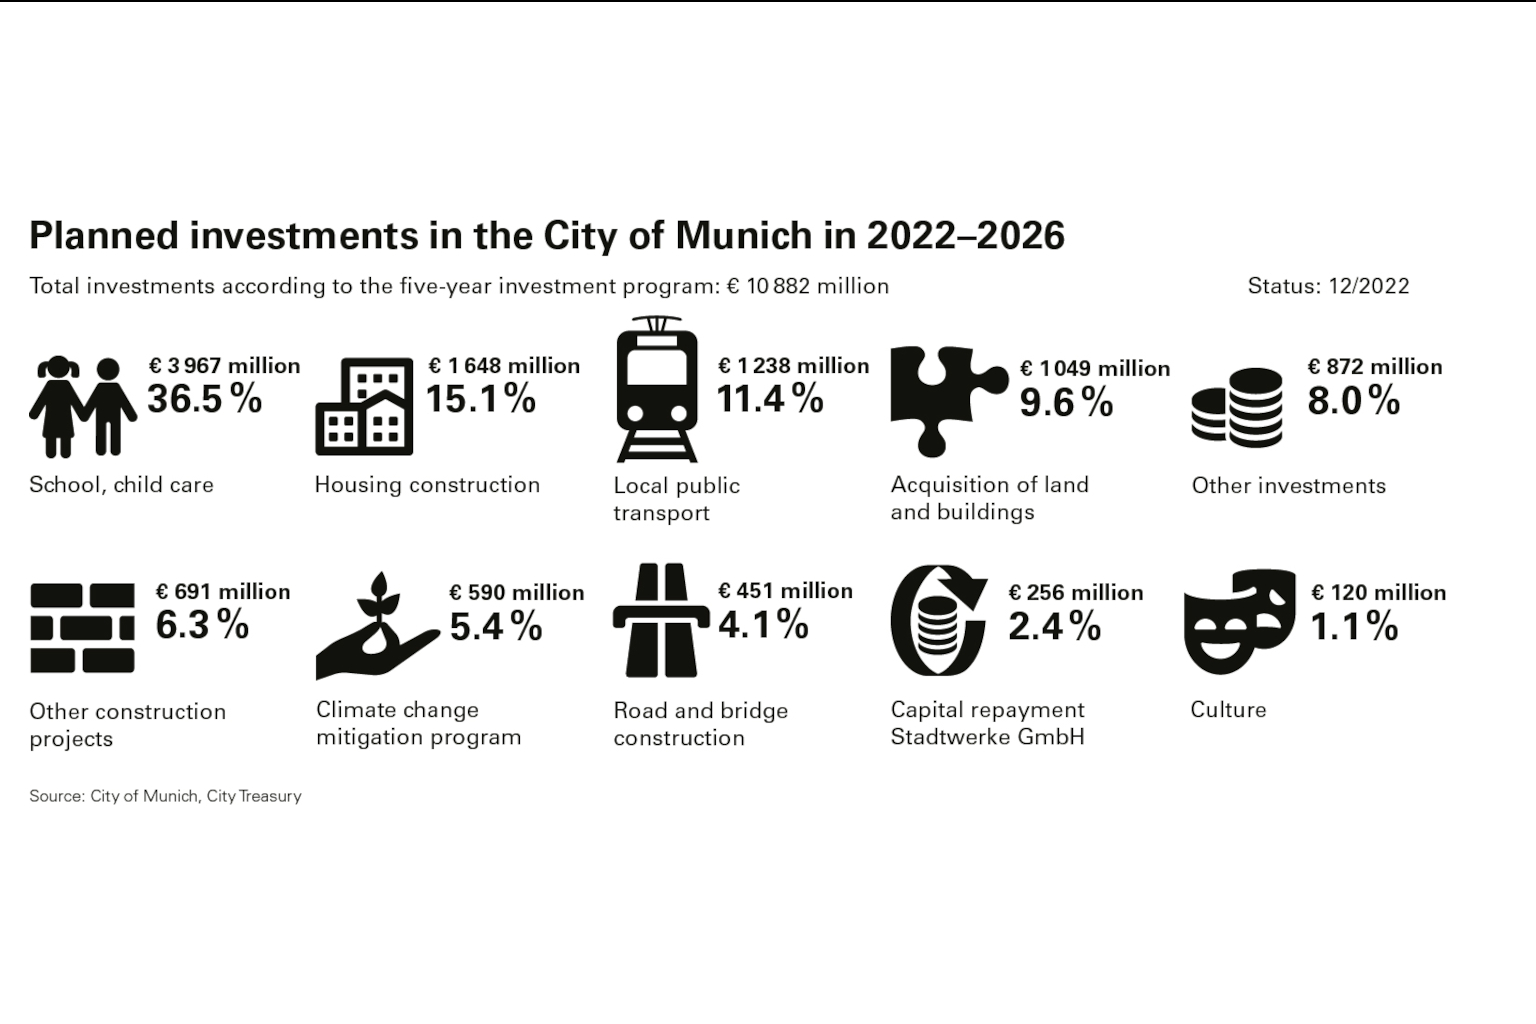 Planned investments in the City of Munich 2022 - 2026